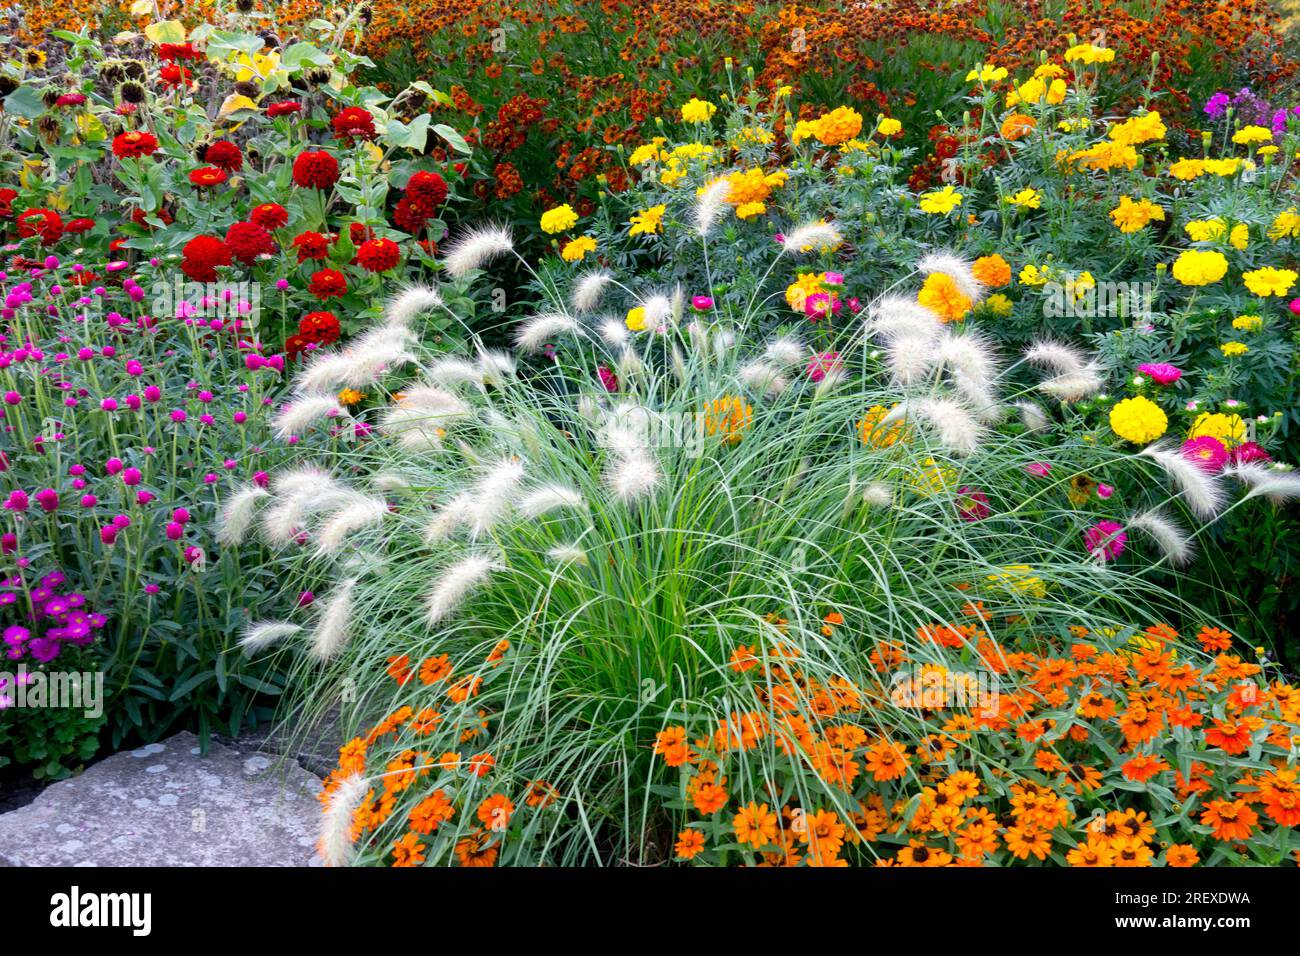 Herbaceous Garden Flower Bed Border Plants Colorful Edging Summer Blooming flowers Stock Photo